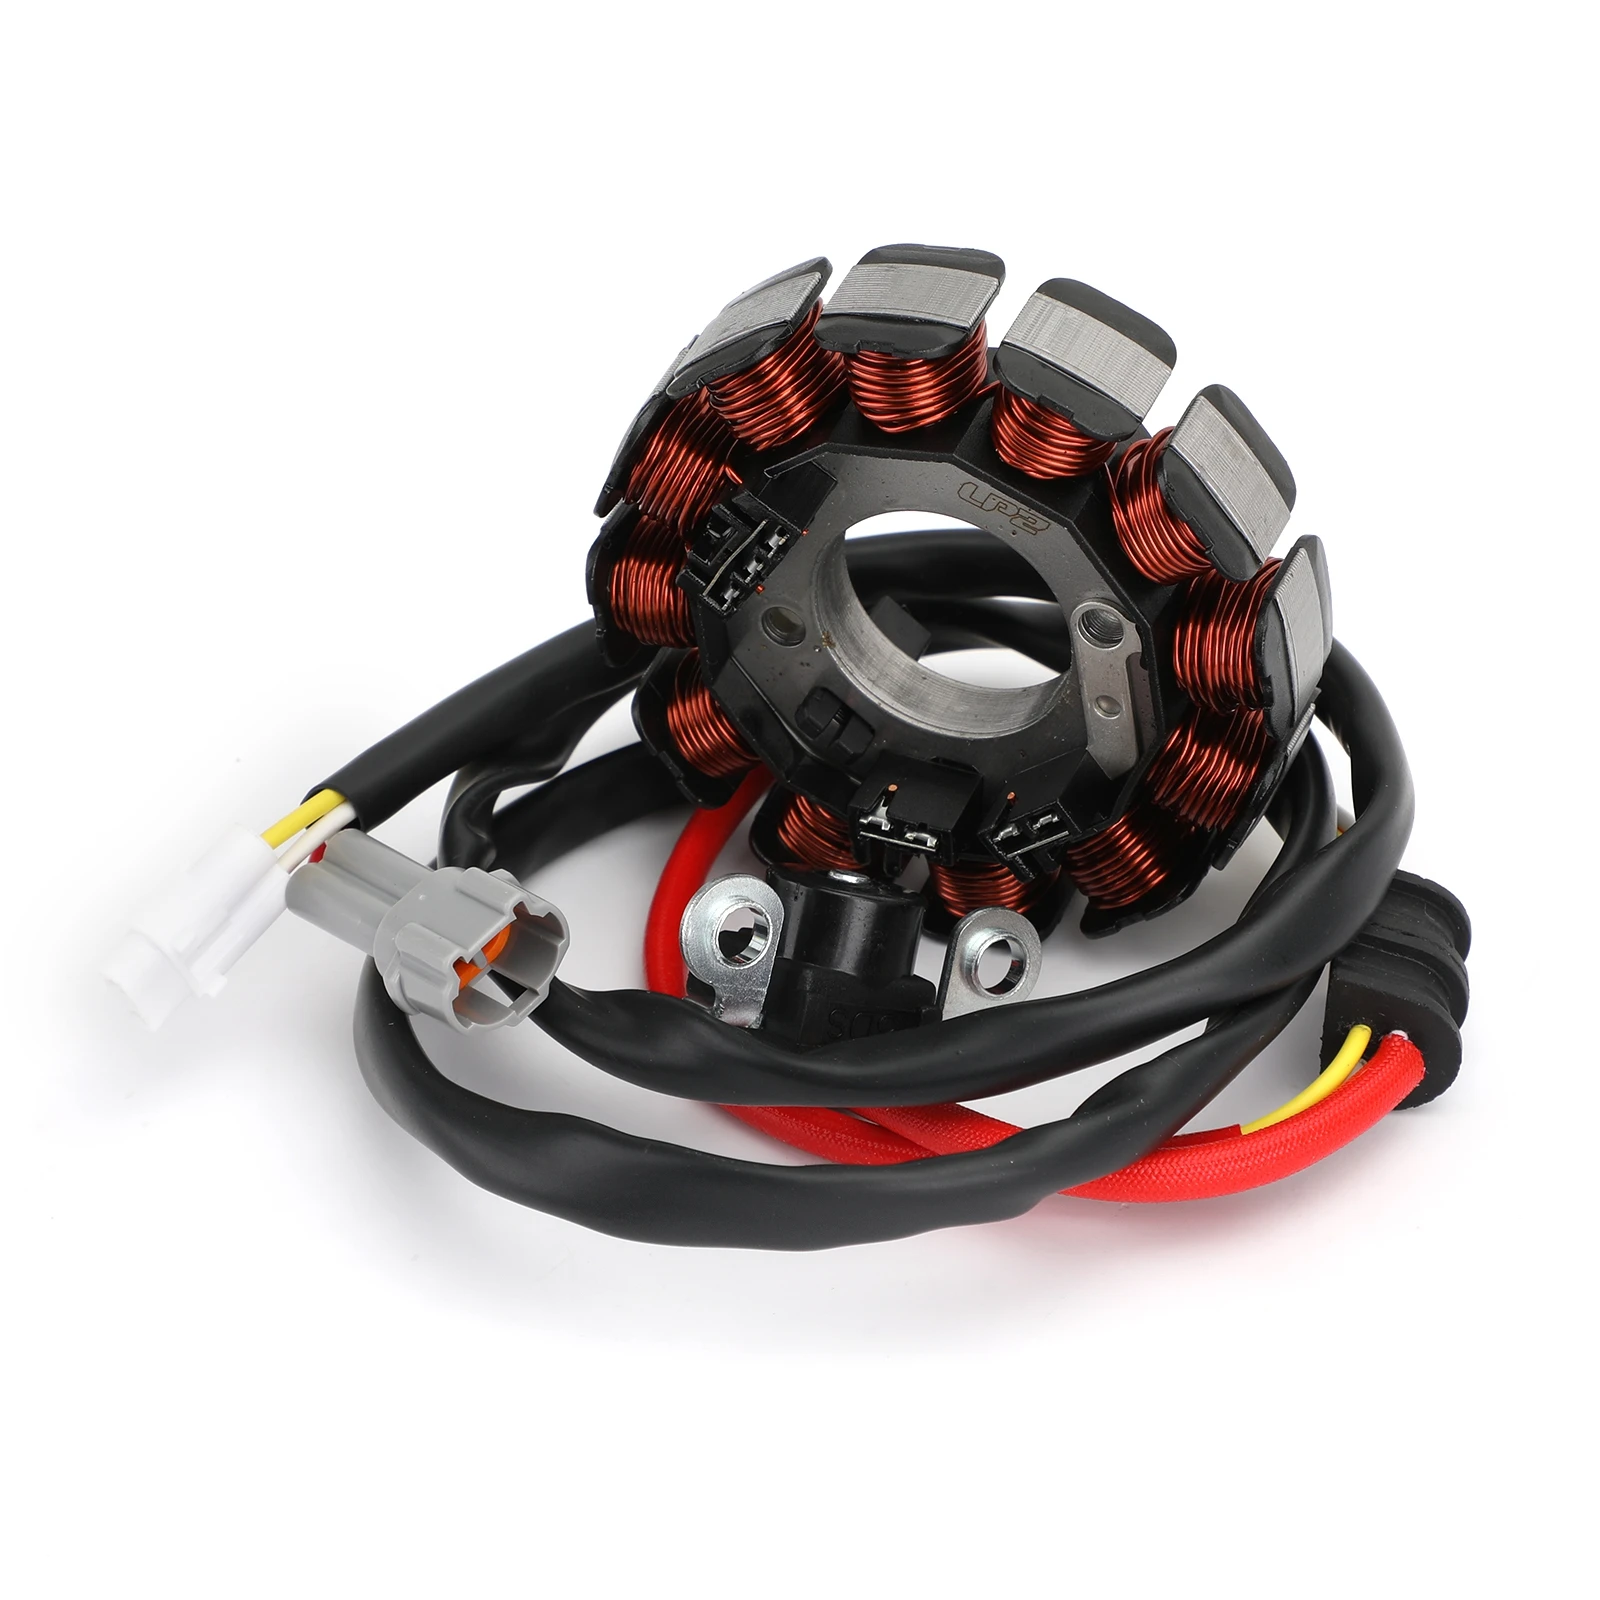 

Areyourshop for Yamaha YFZ450 YFZ 450 R/X Limited / Special Edition 04-08 Magneto Generator Engine Stator Coil 5TG-81410-00